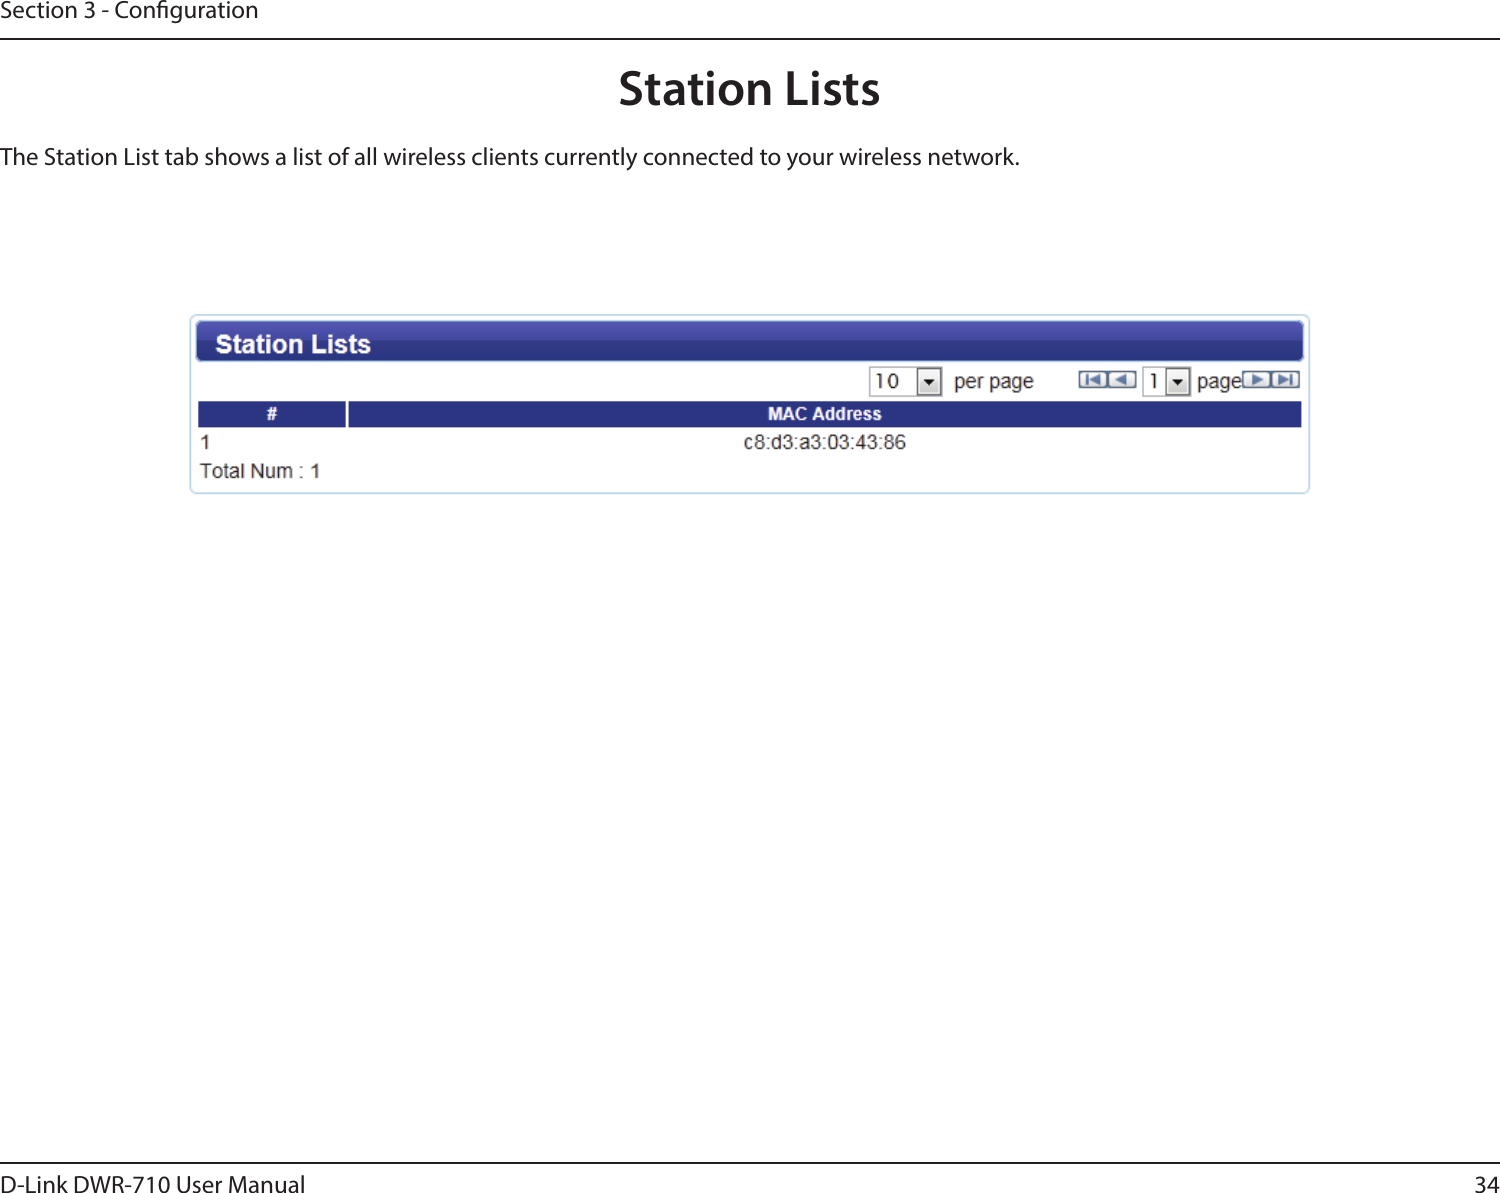 34D-Link DWR-710 User ManualSection 3 - CongurationThe Station List tab shows a list of all wireless clients currently connected to your wireless network. Station Lists